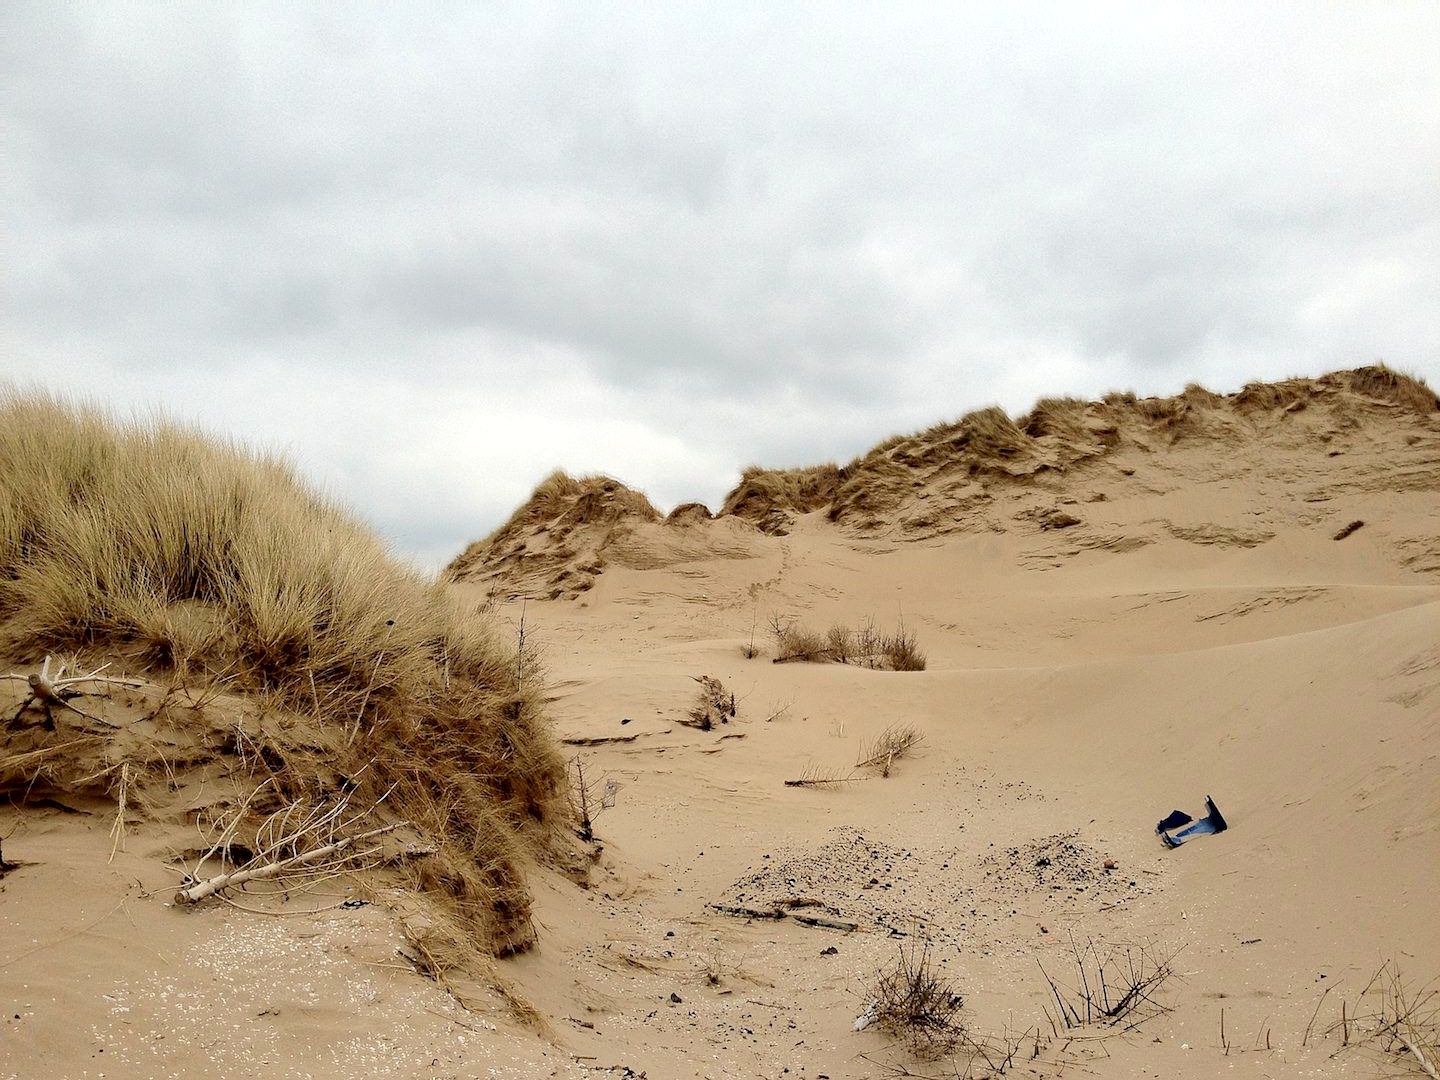 An image showing trees that have been planted at Formby Sand Dunes to help rebuild the dunes